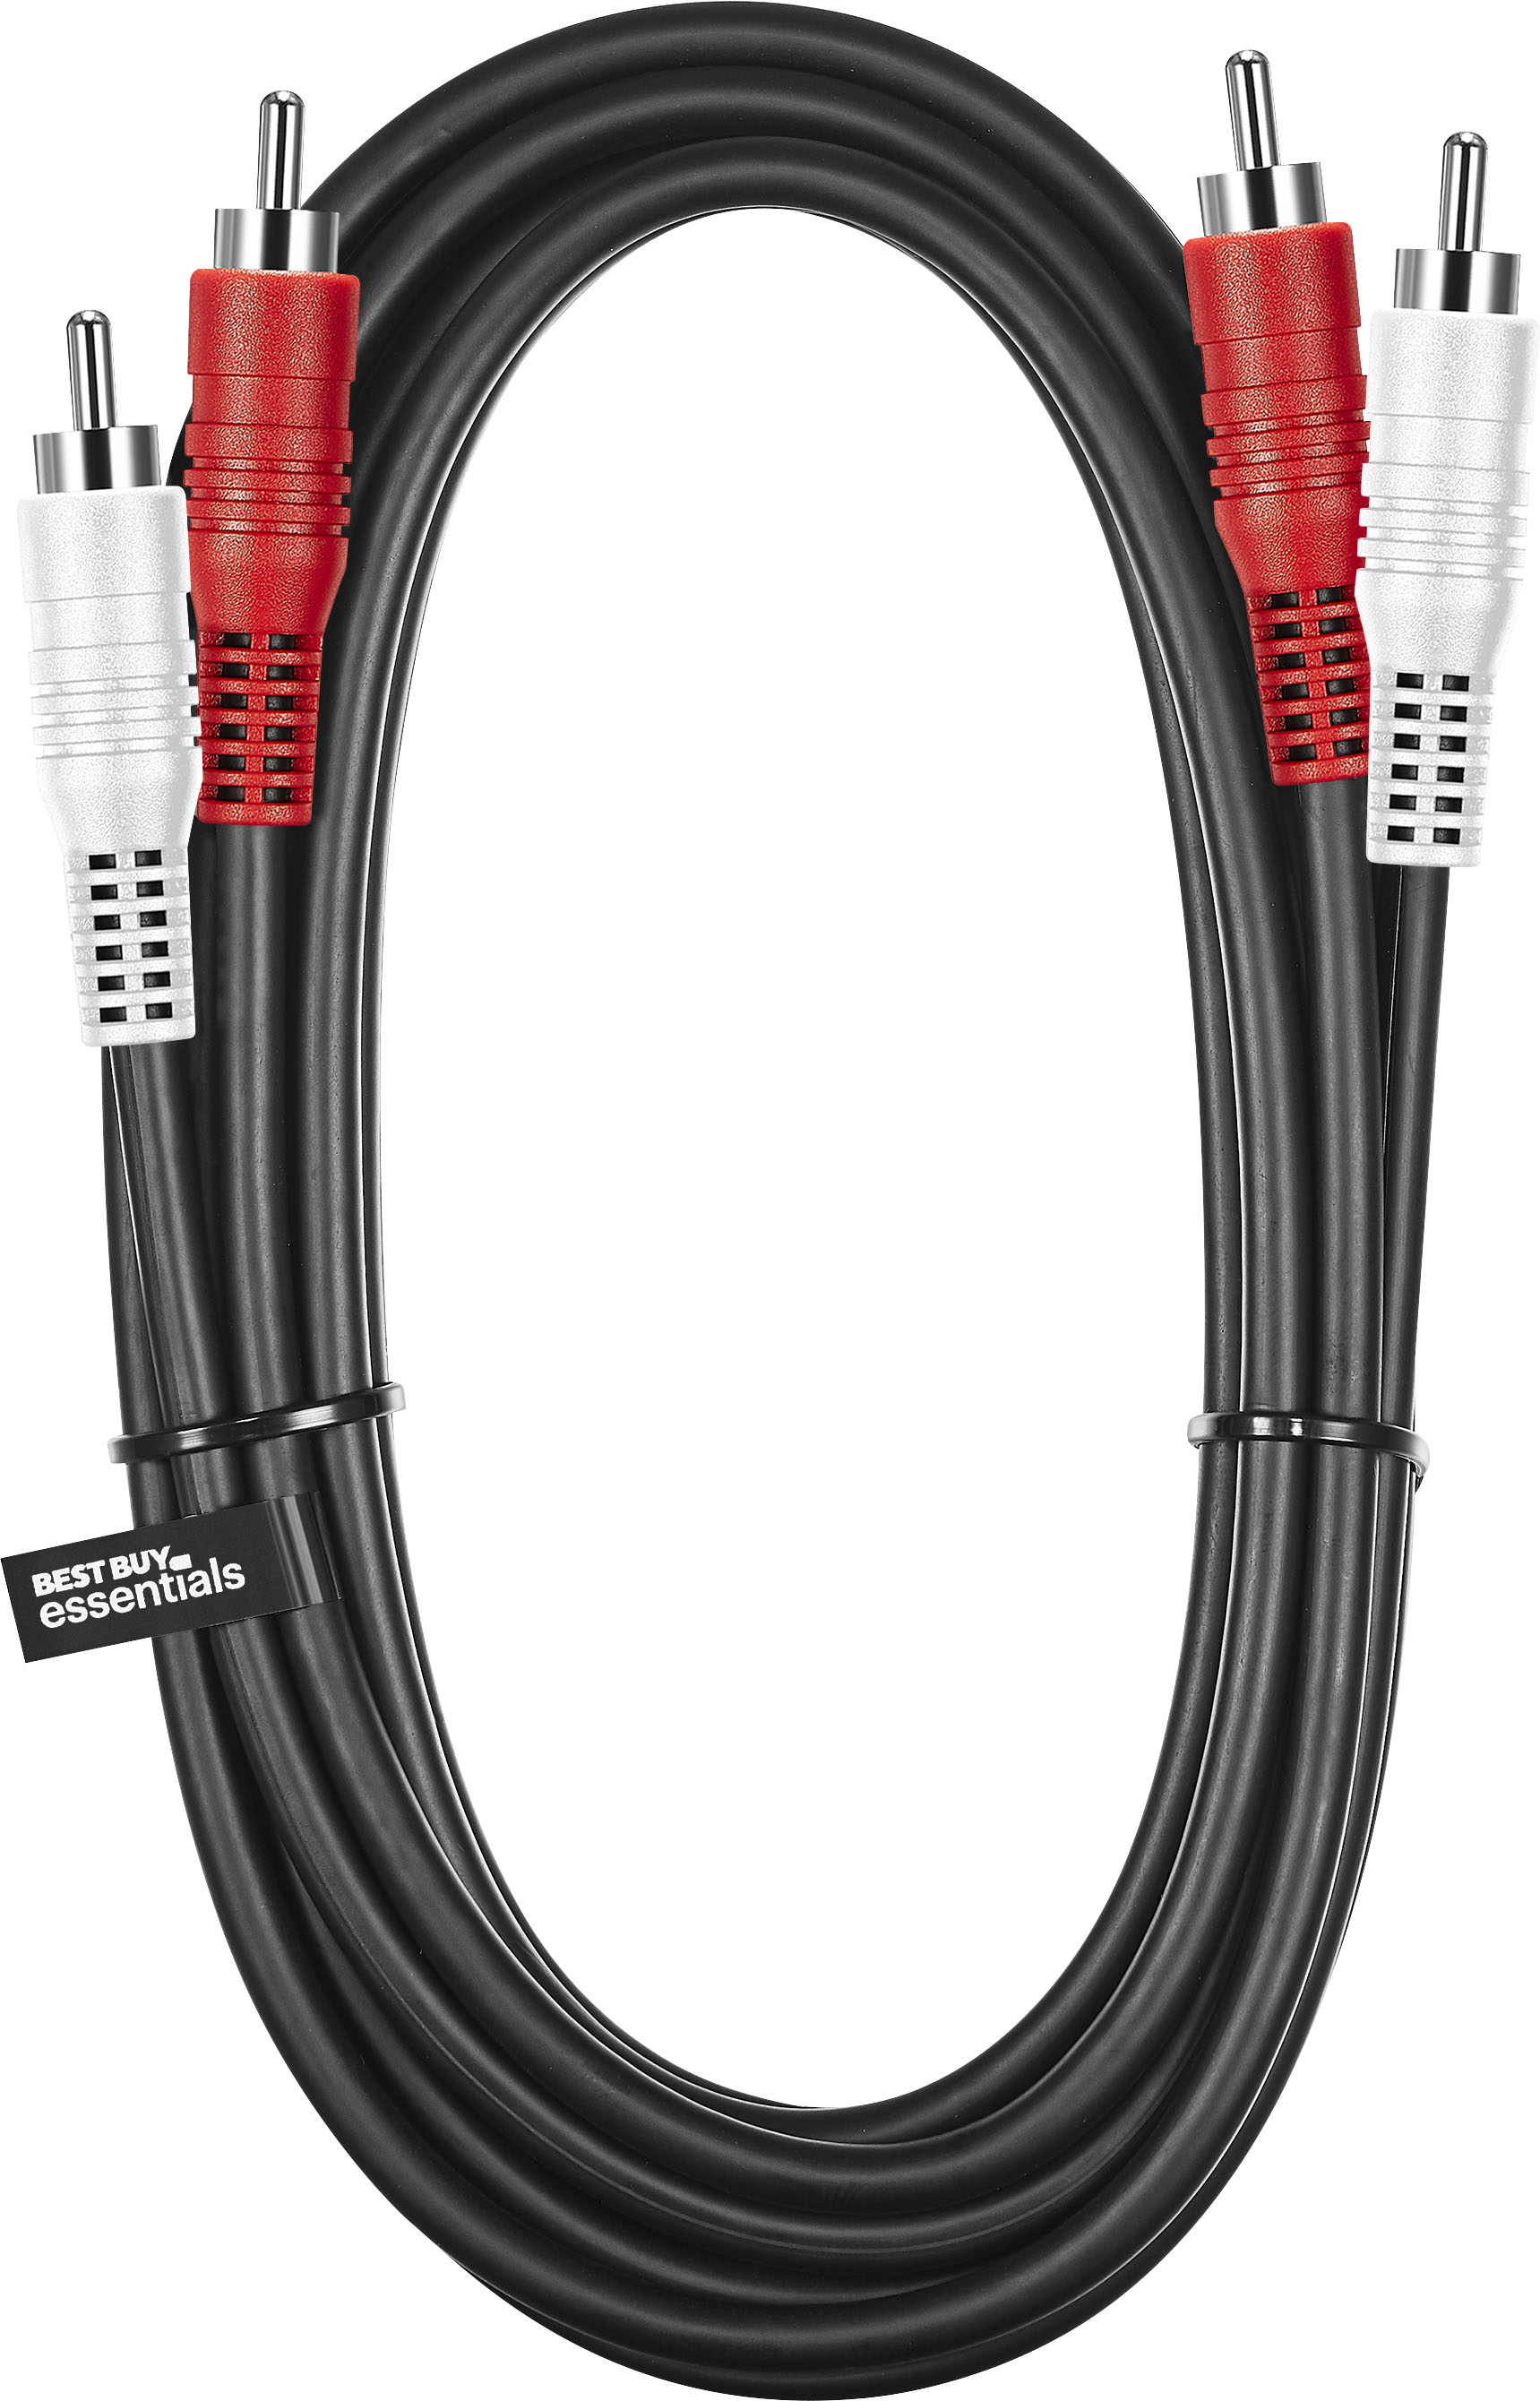 Best Buy essentials™ 6' Composite A/V Cable Black BE-HCL318 - Best Buy